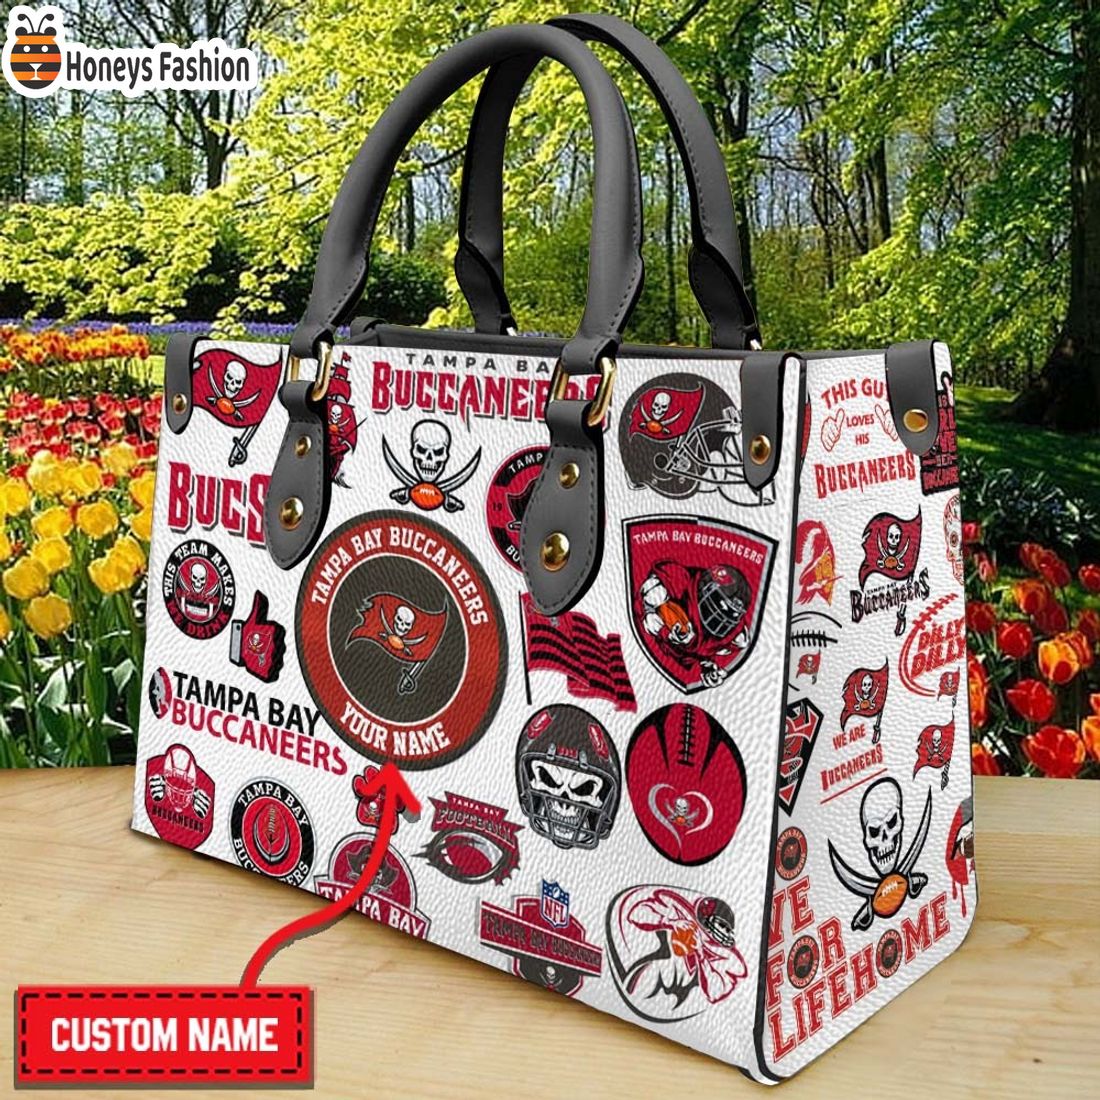 Tampa Bay Buccaneers Personalized Leather Handbag